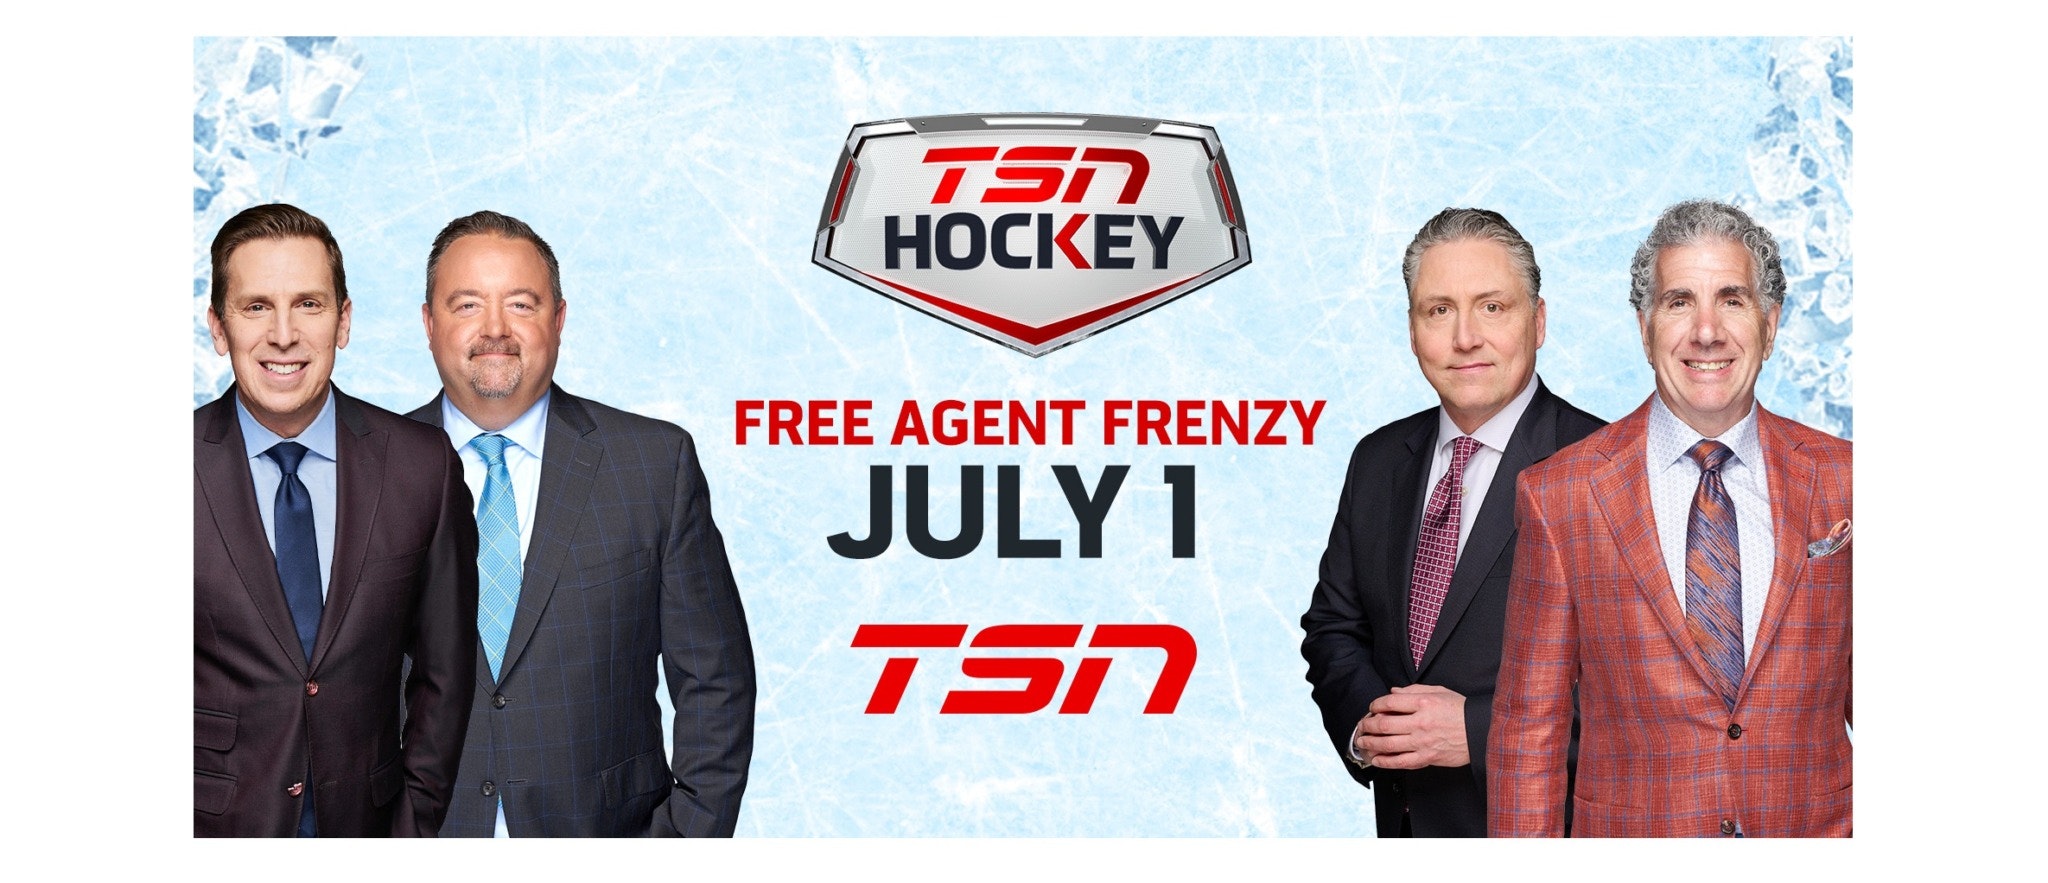 TSN FREE AGENT FRENZY Provides Wall-to-Wall Coverage of NHL Free Agency with Comprehensive Live Special, July 1